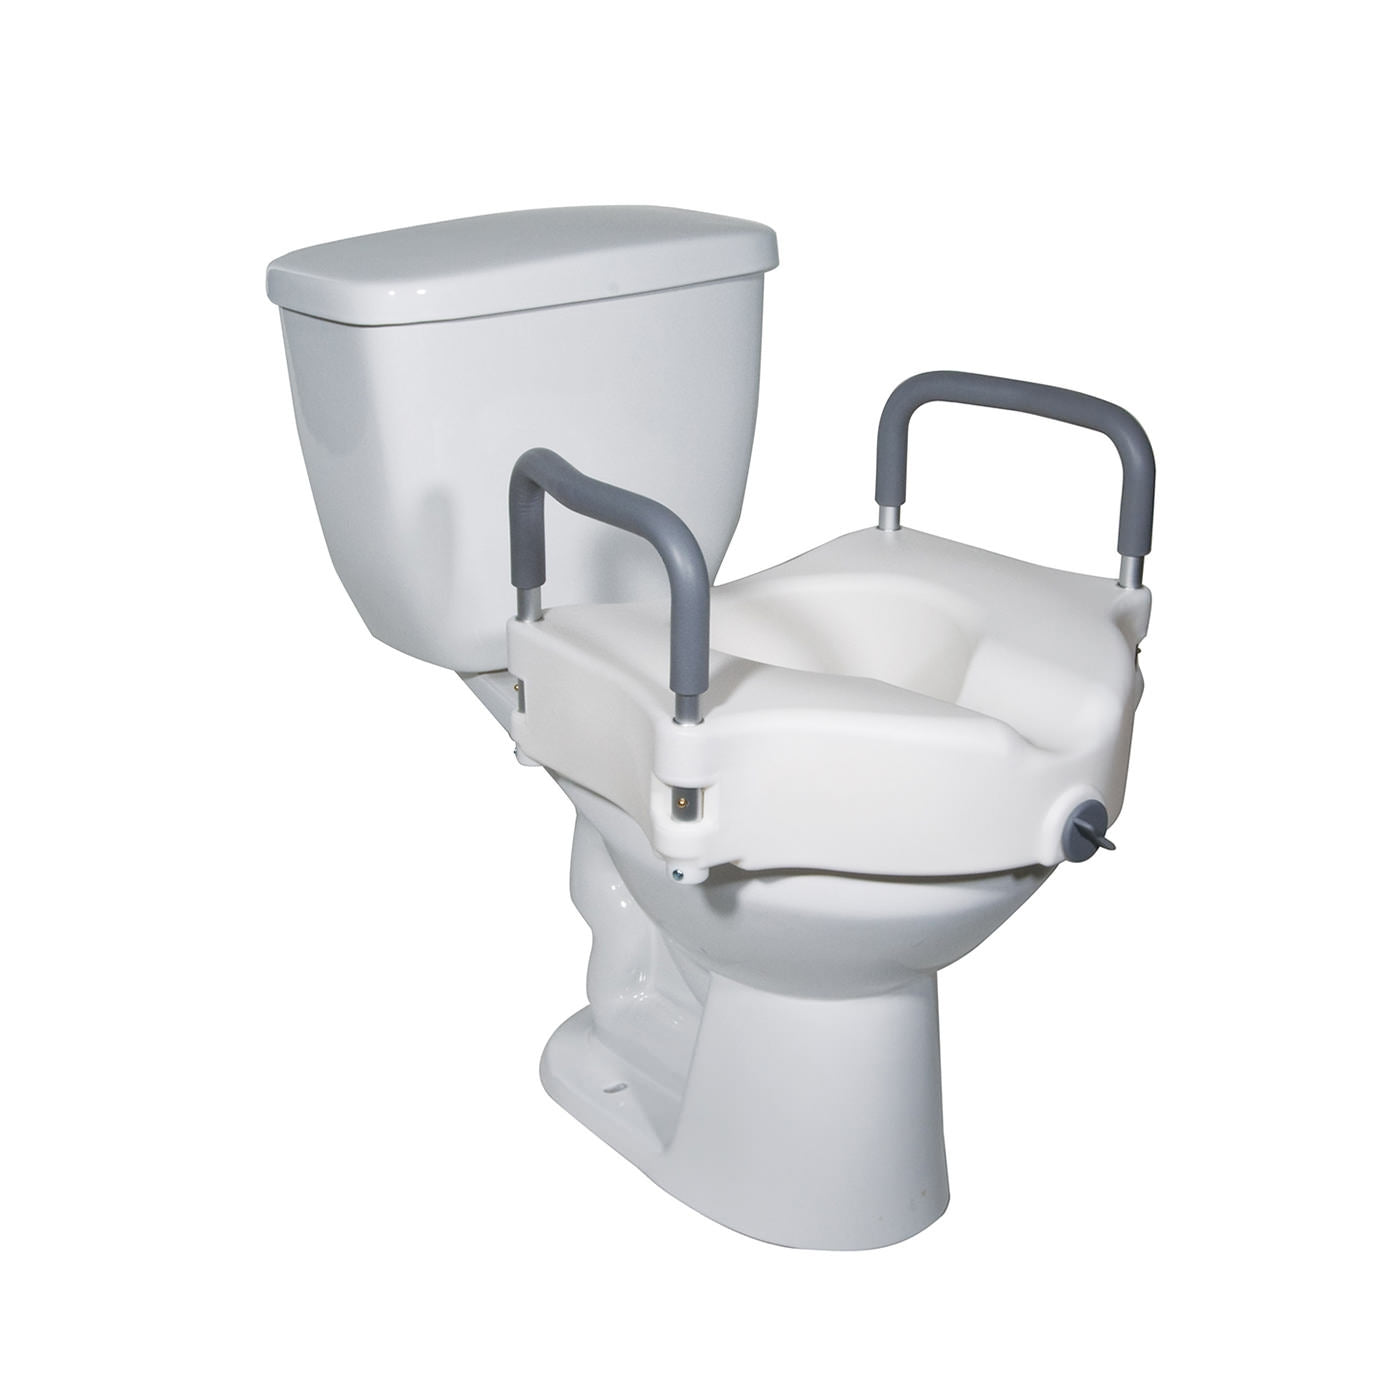 padded elevated toilet seat